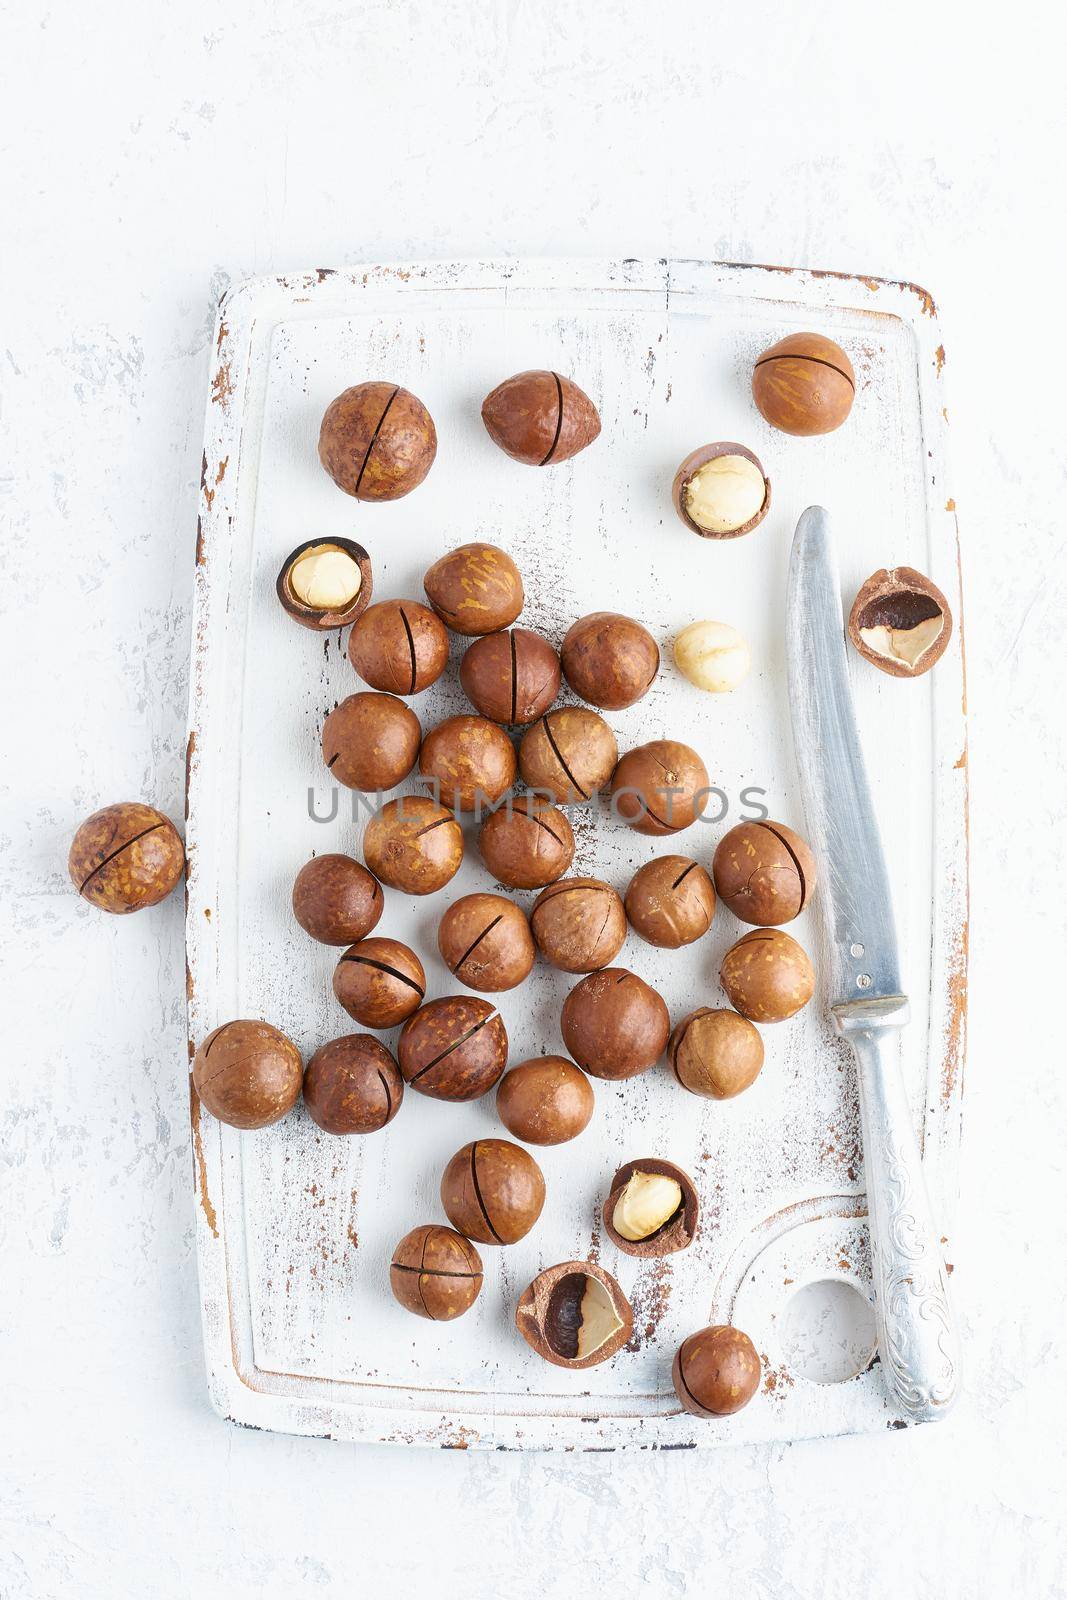 Plate with almonds in endocarp, whole and chopped open nuts in bulk on a cutting board by NataBene